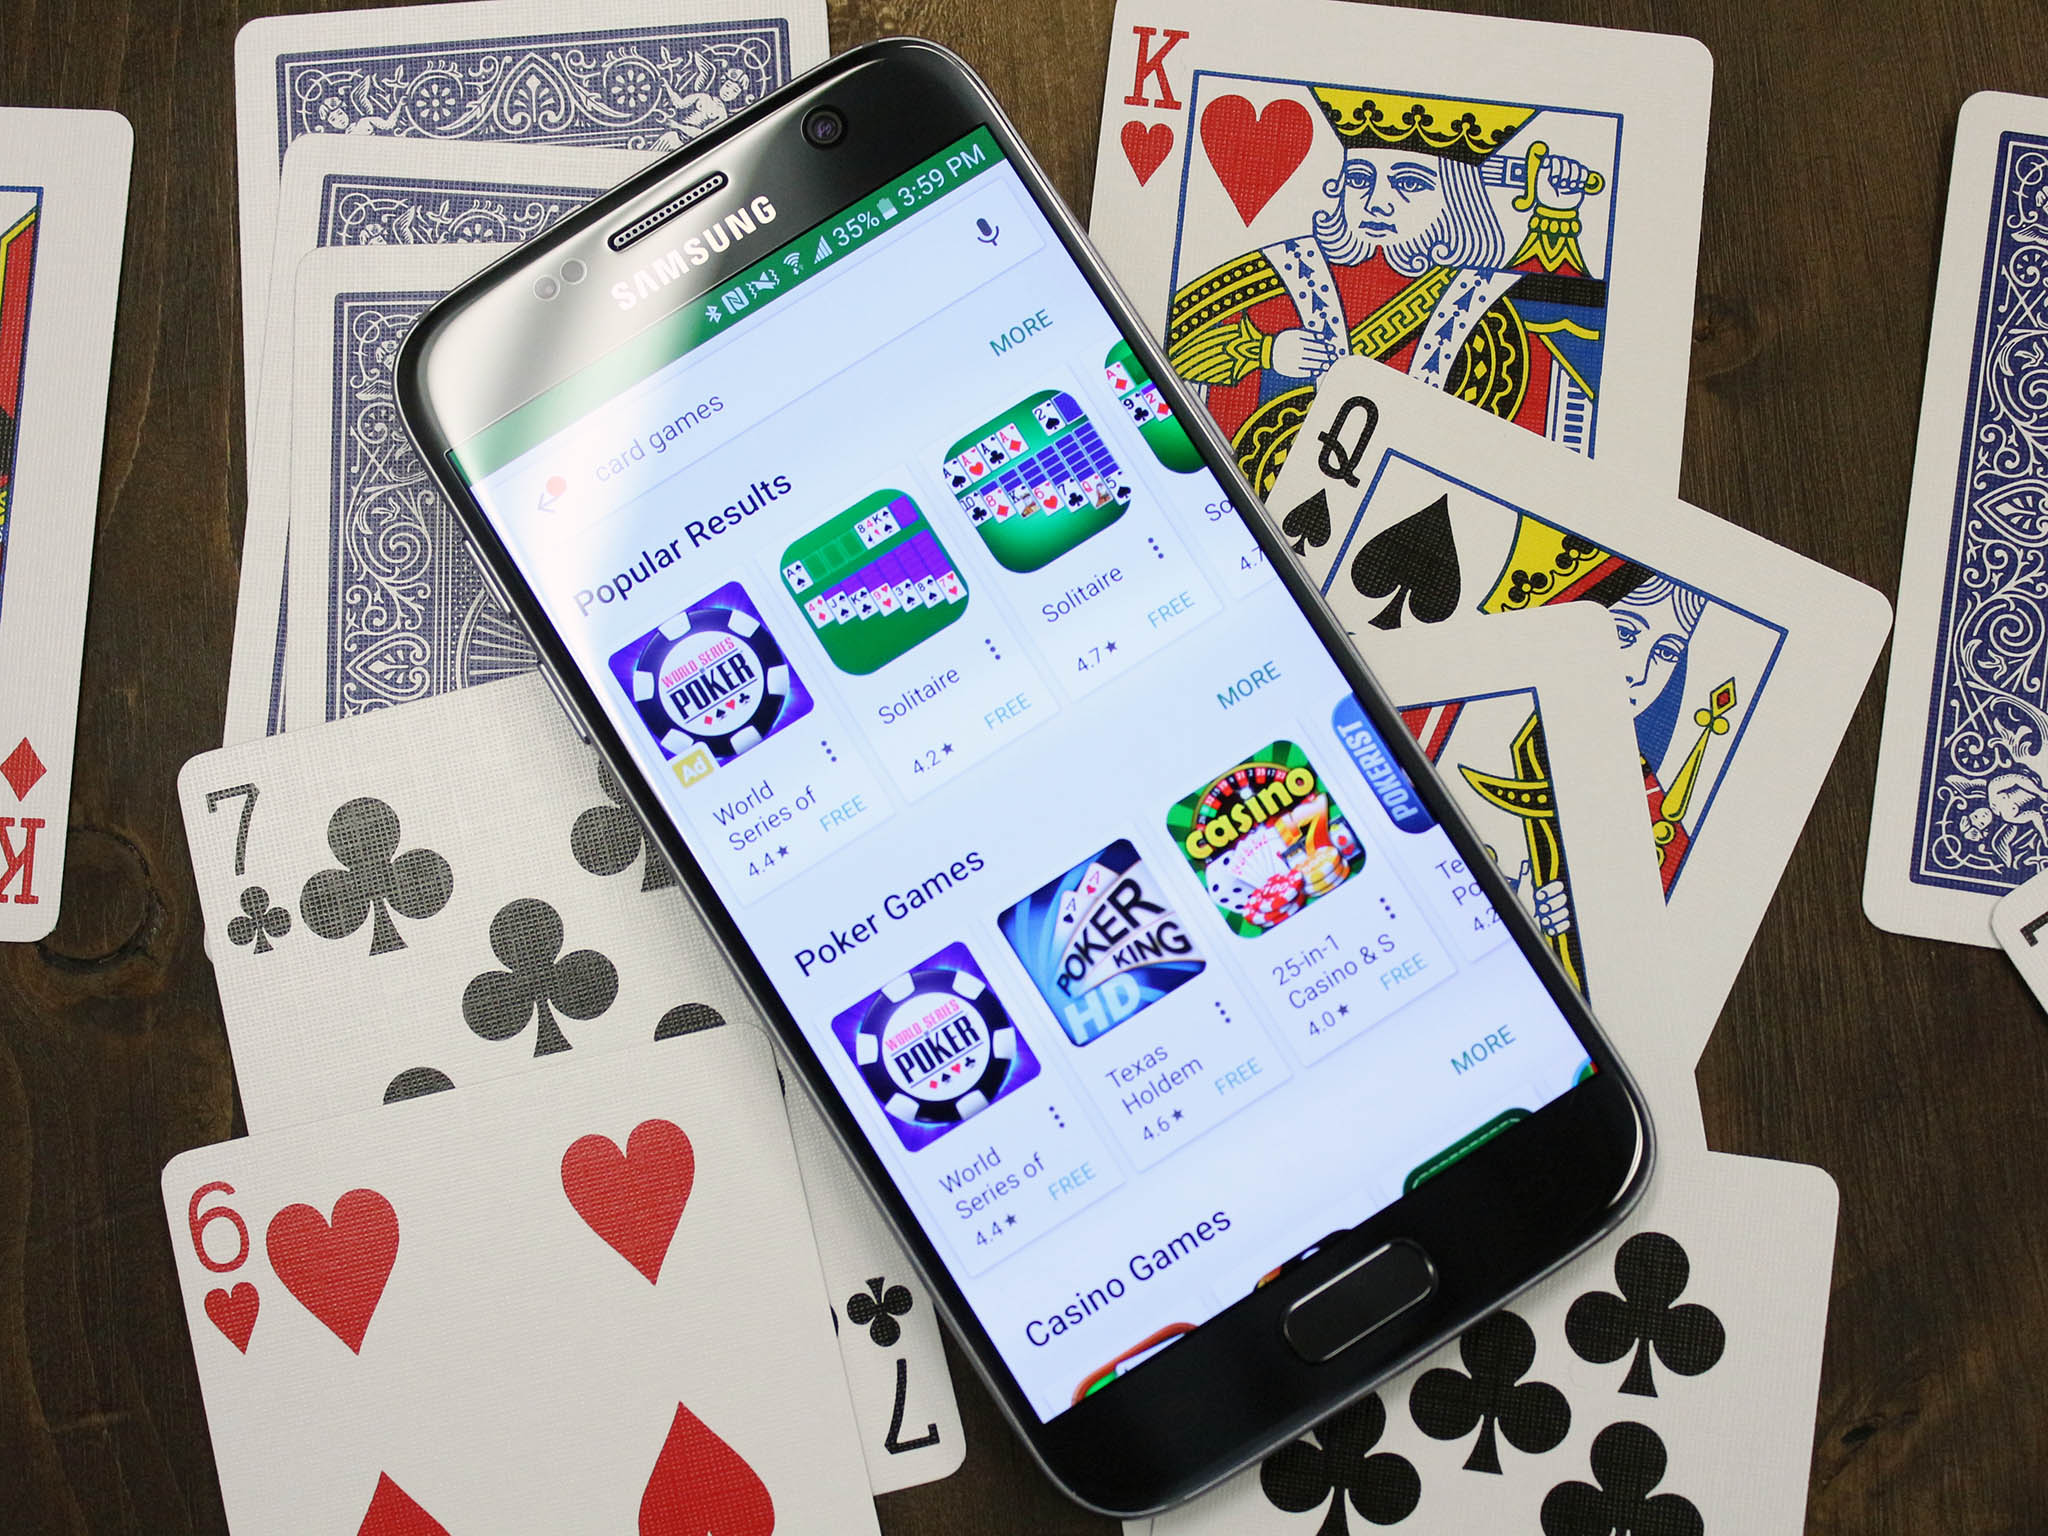 https://www.androidcentral.com/sites/androidcentral.com/files/styles/large_wm_brb/public/article_images/2016/06/best-card-games-for-amdroid.jpg?itok=6WhpuB1-